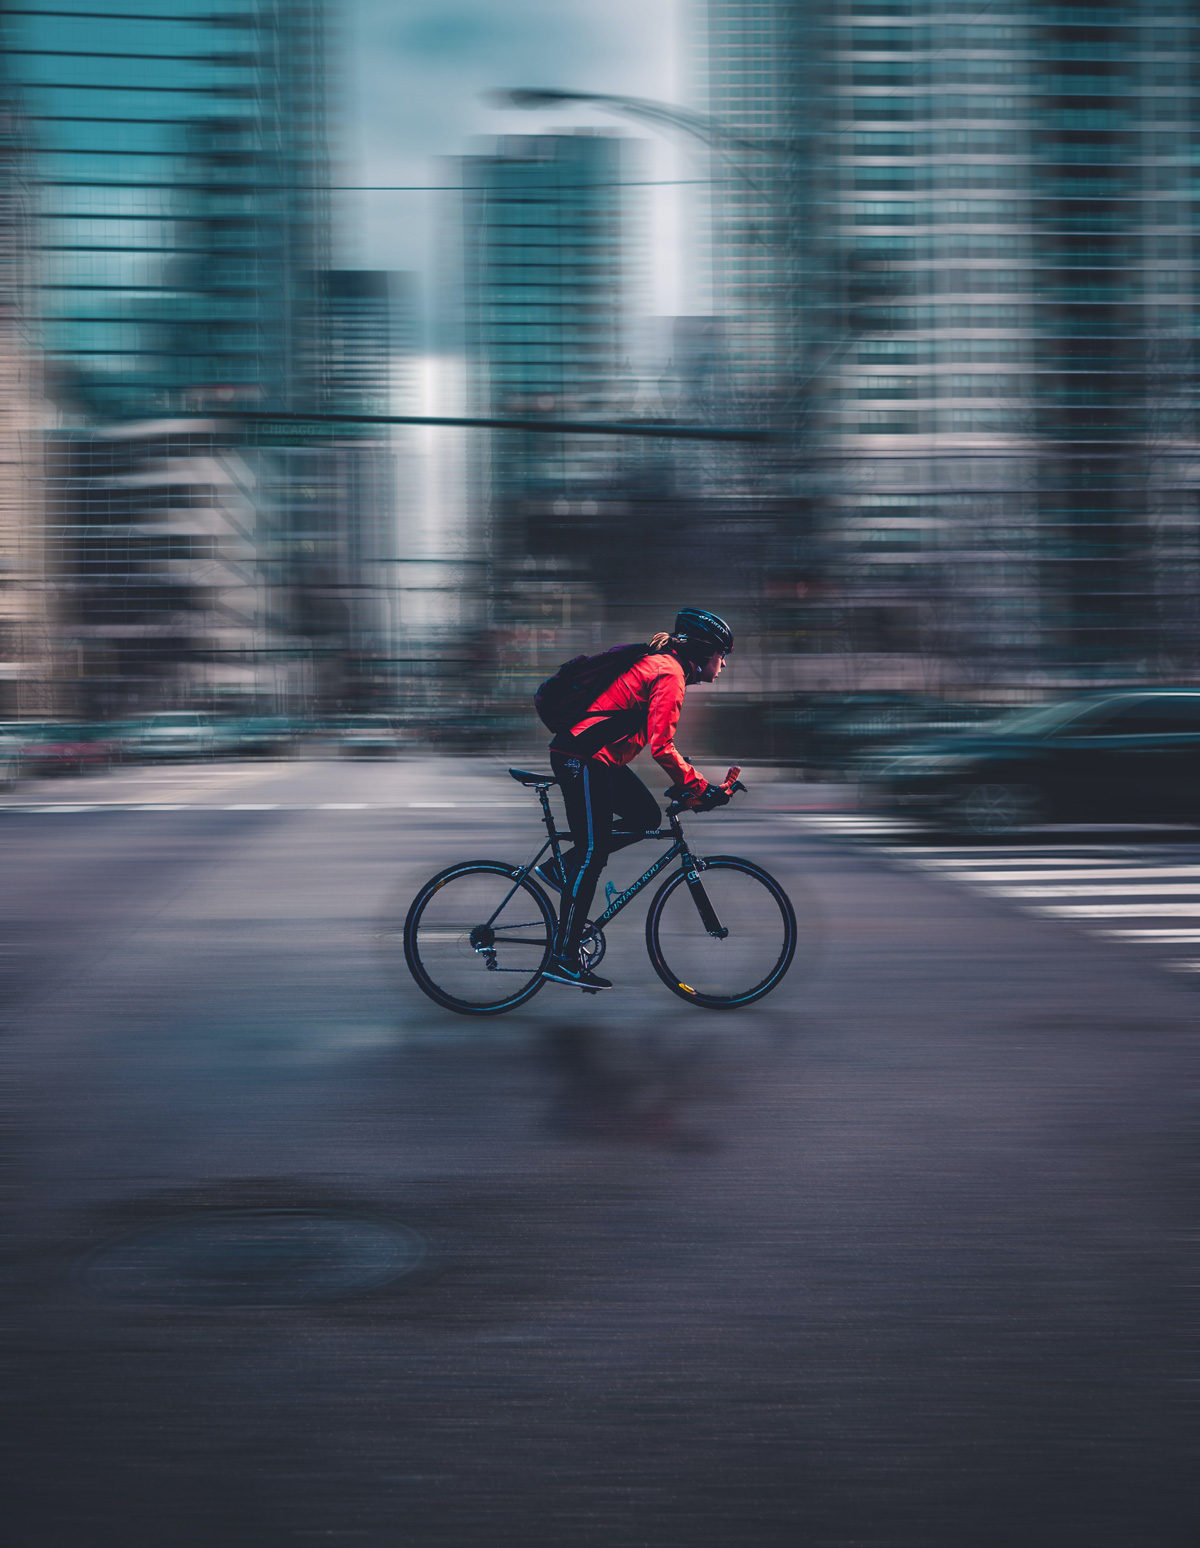 Biking: The next frontier of urban mobility